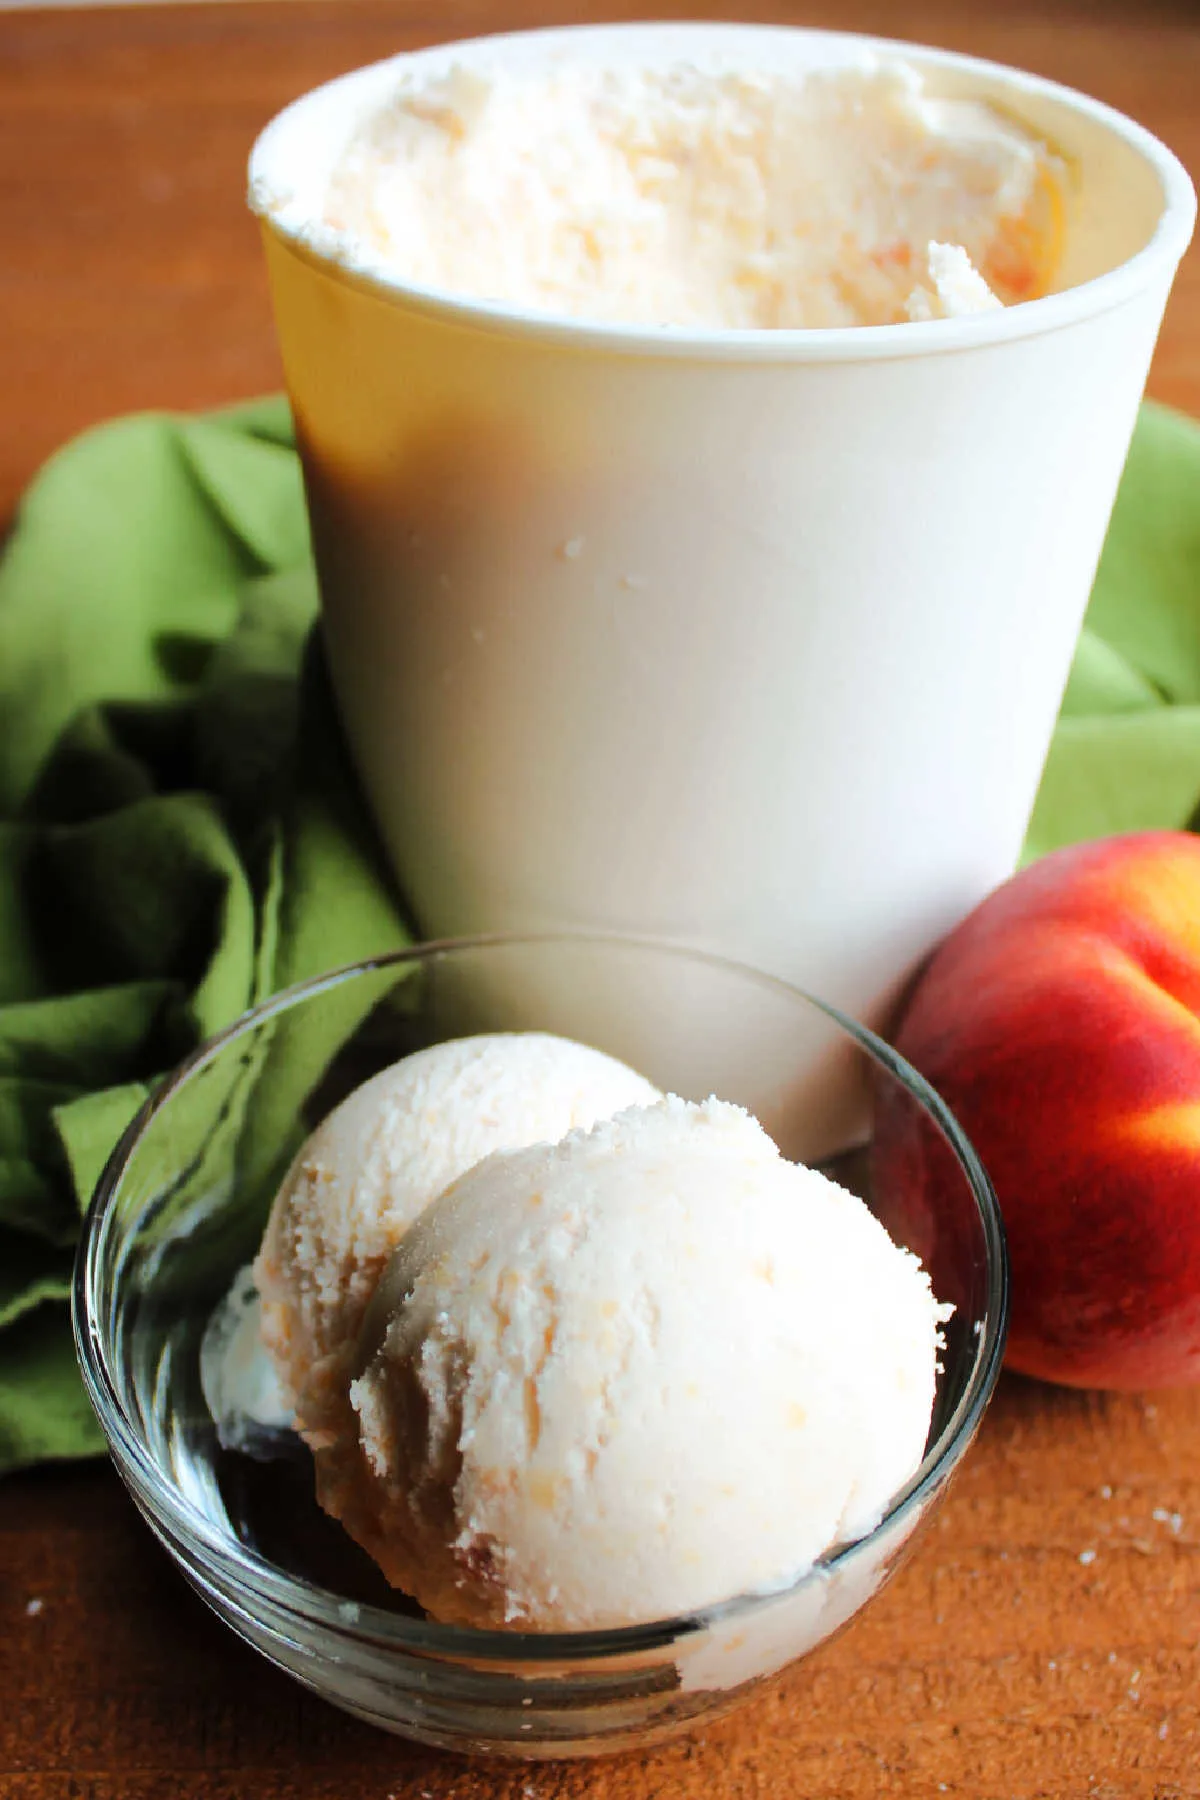 Small bowl of peach ice cream next to a fresh peach and an ice cream storage container.